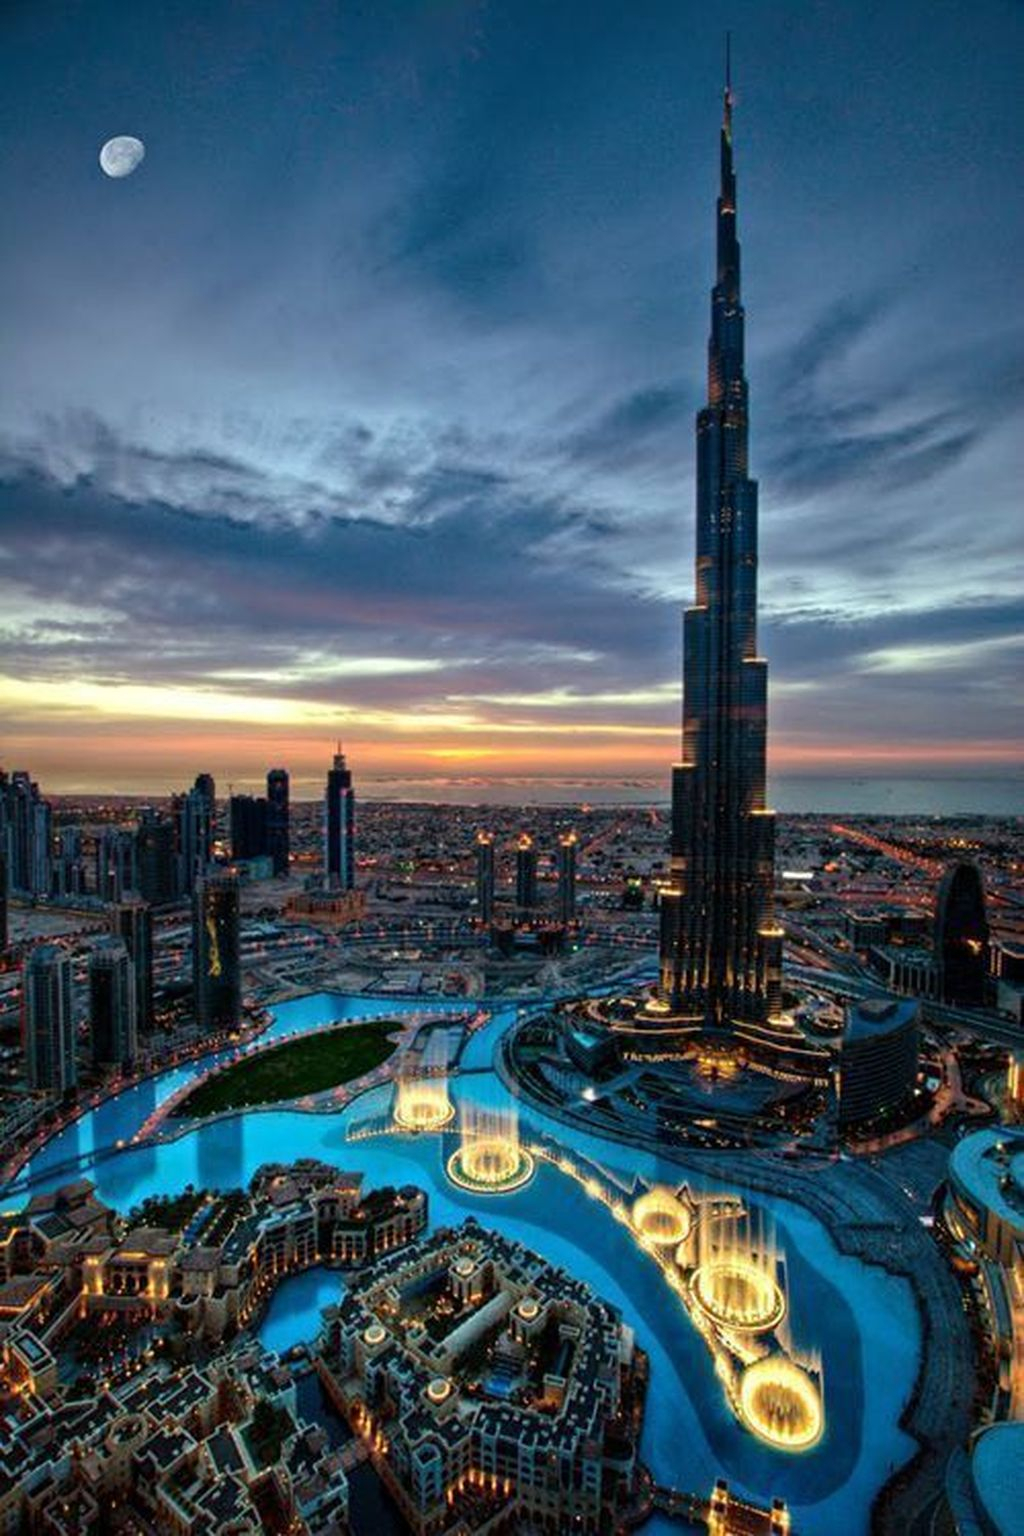 Awesome Photos Of Dubai To Make You Want To Visit It19